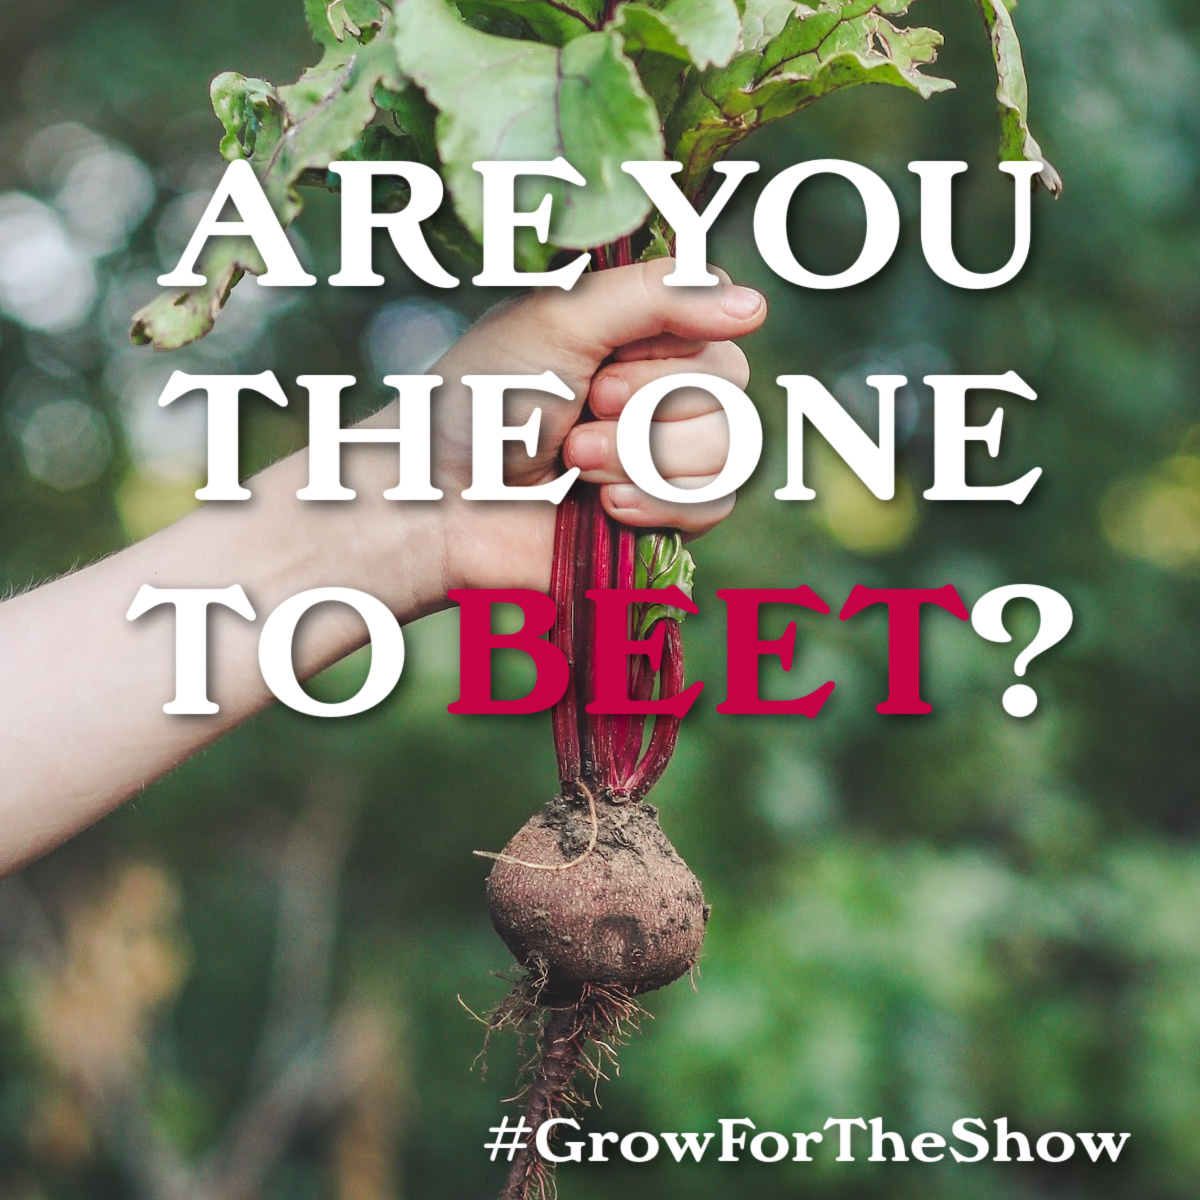 It’s not just about flowers at the Knowsley Flower Show there are classes for veg, plants, scones, jam, and more! The show is open to everyone, whether you’re a green-fingered expert or enthusiastic novice. Find out more at: orlo.uk/6EVZJ #GrowForTheShow